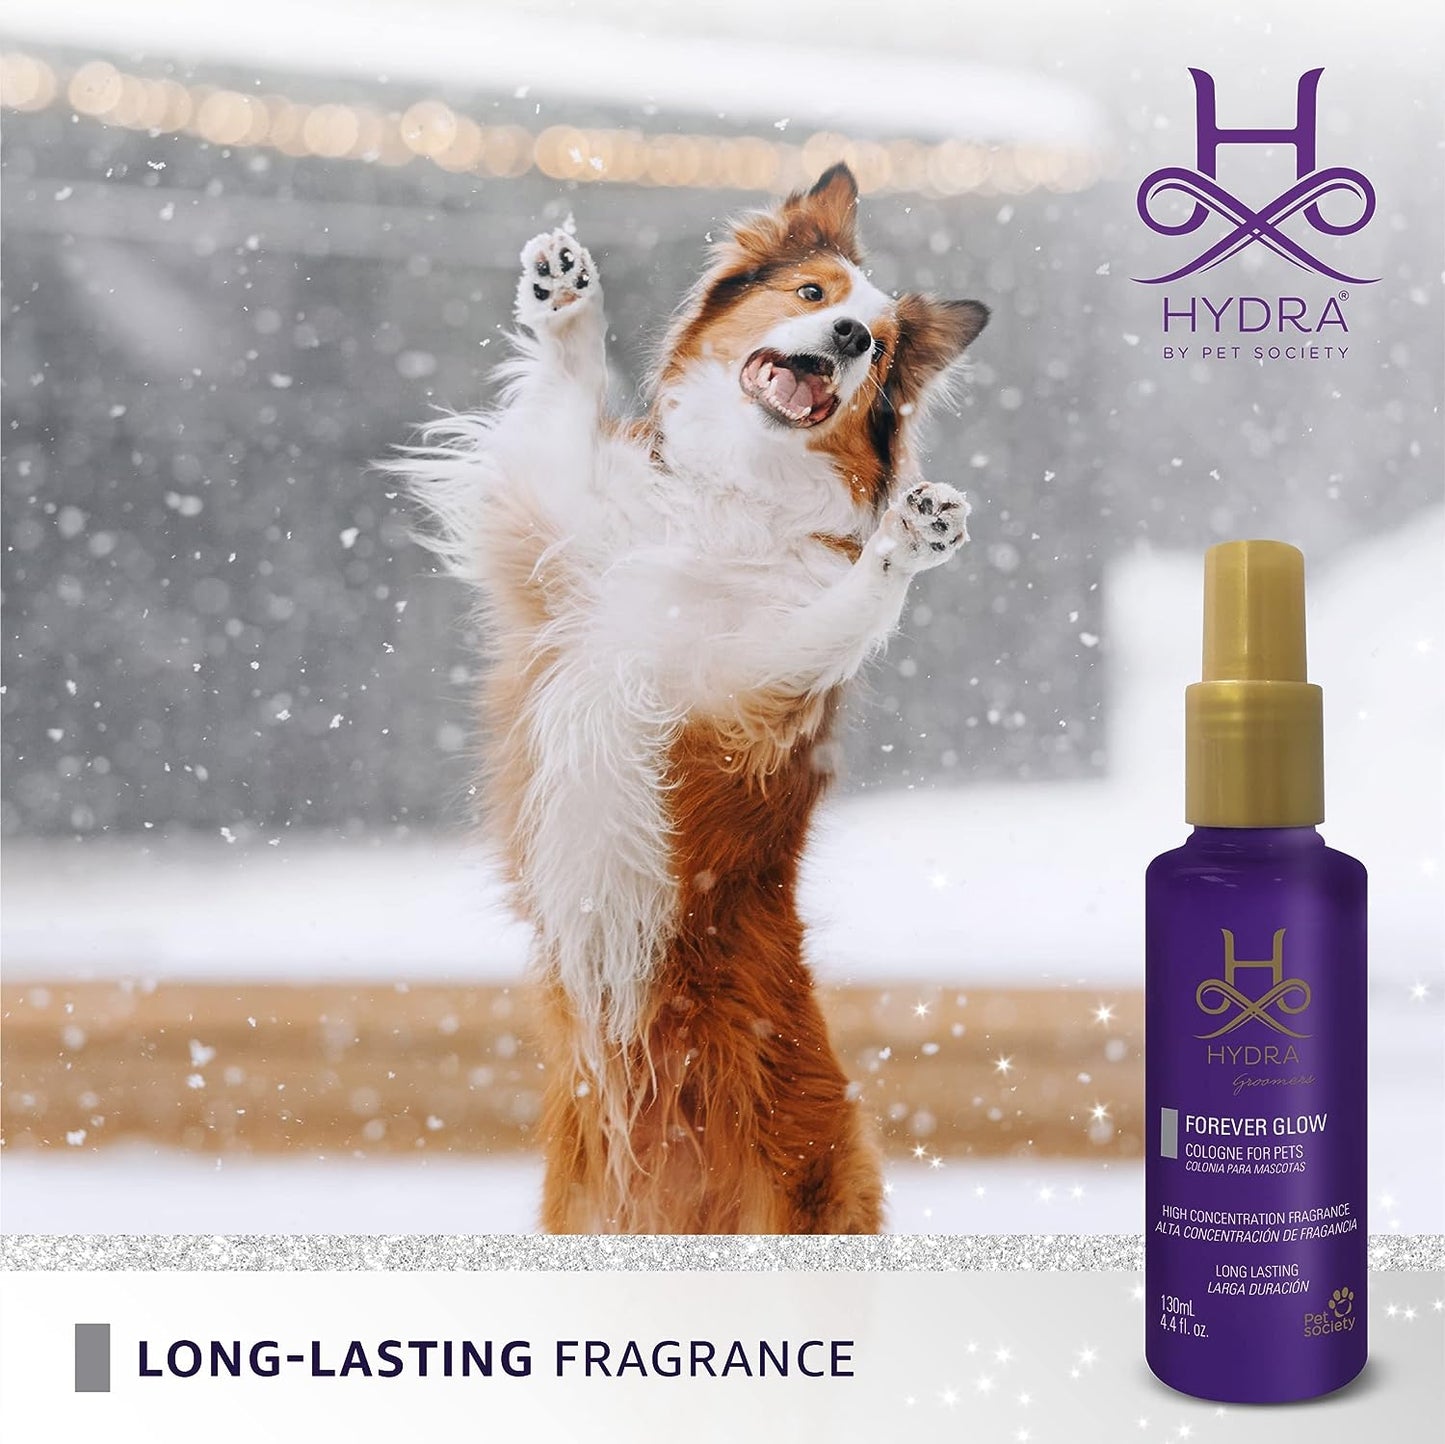 Hydra Groomer’s Forever Glow Vegan & Cruelty-Free Cologne Spray For Pets 130 ml